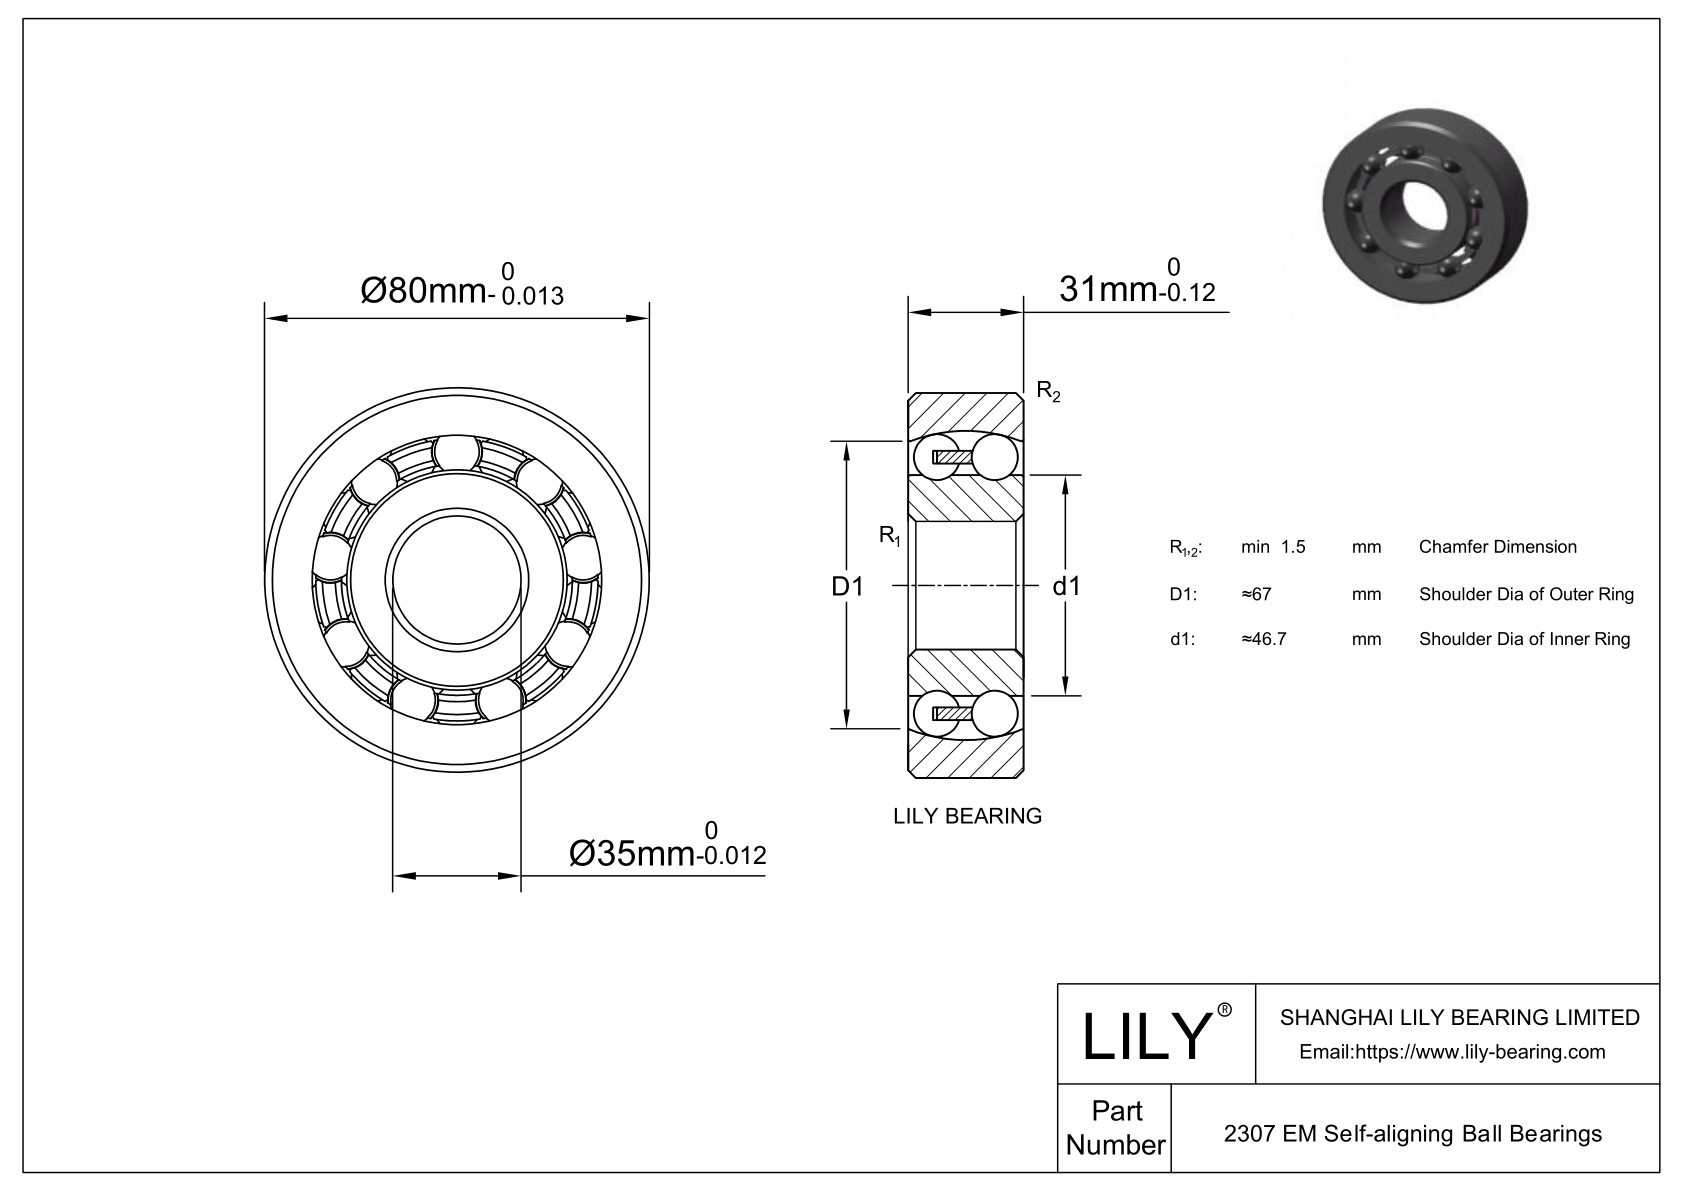 S2307 EM Stainless Steel Self Aligning Ball Bearings cad drawing